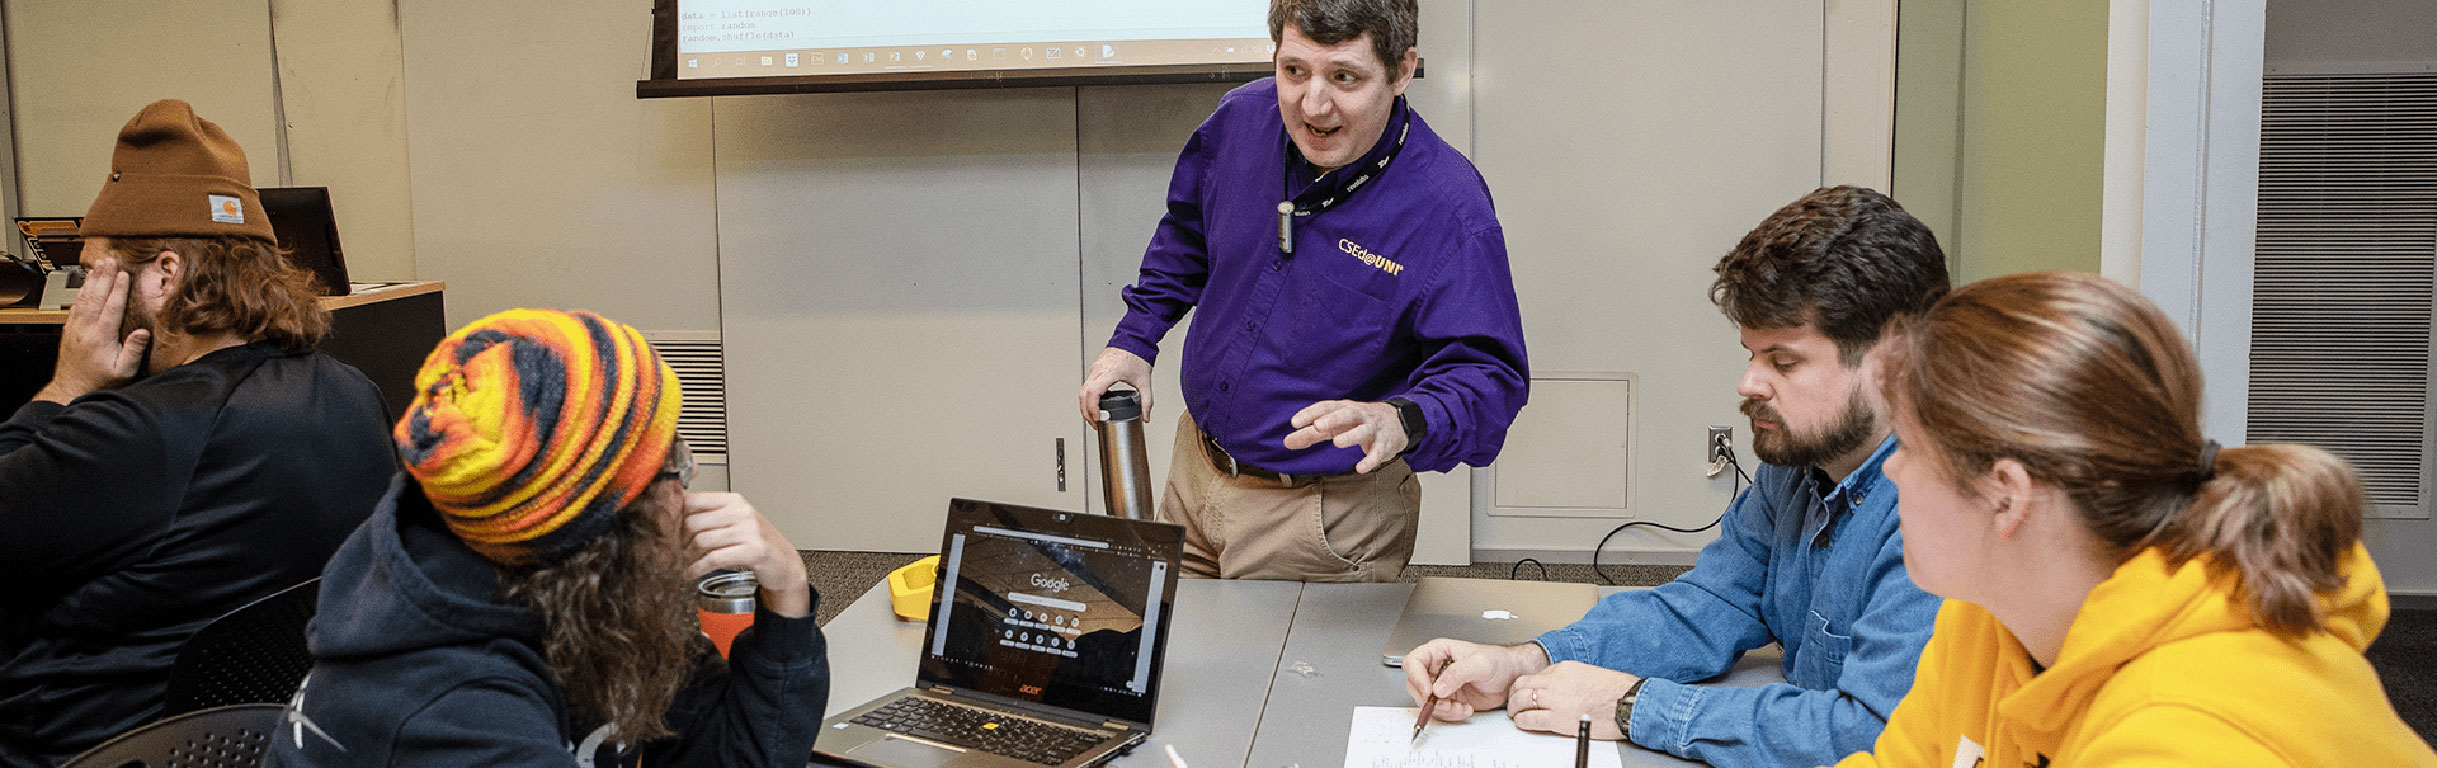 Professor Schafer explaining theory to a group of students huddled around a laptop.